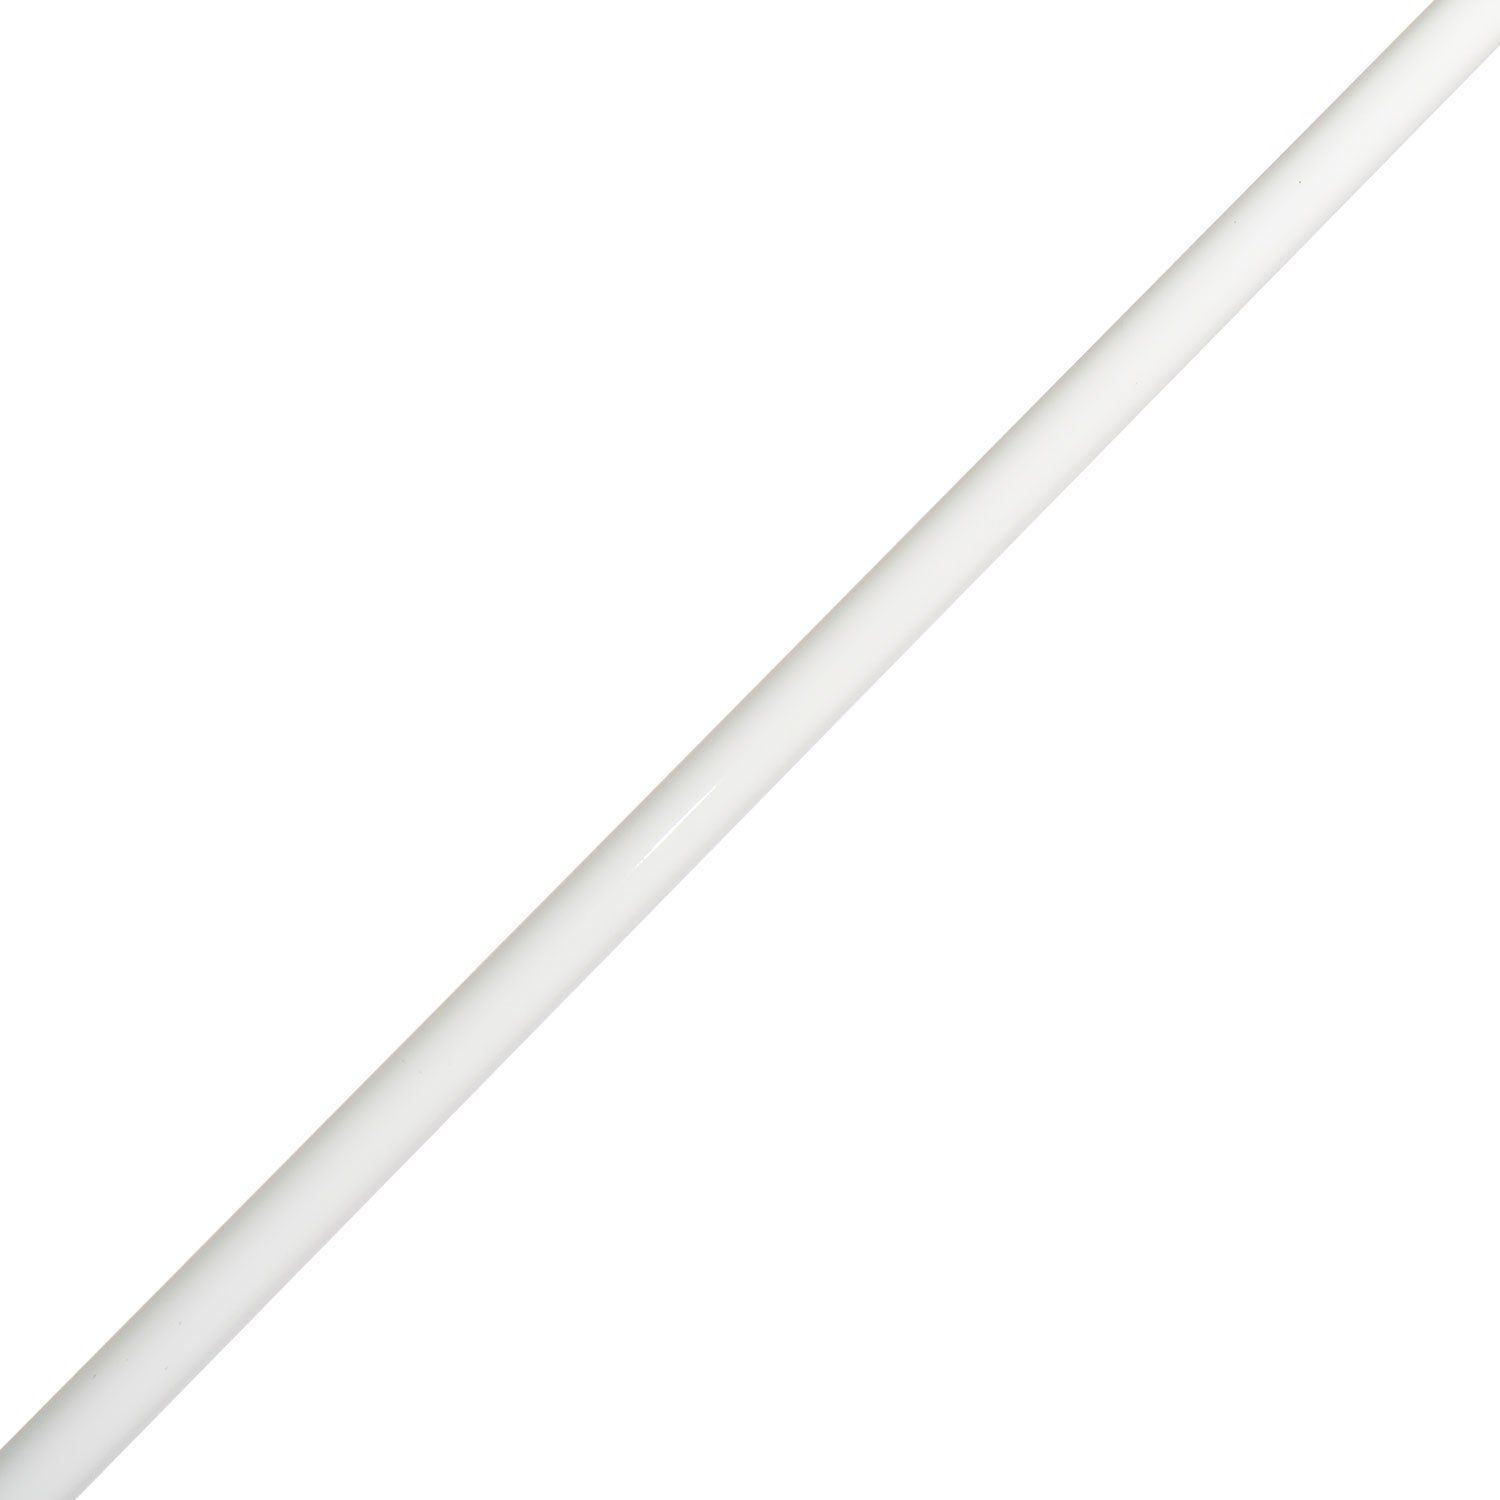 CRB 6'6" Med-Light Color Series Rod Blank - IS661ML